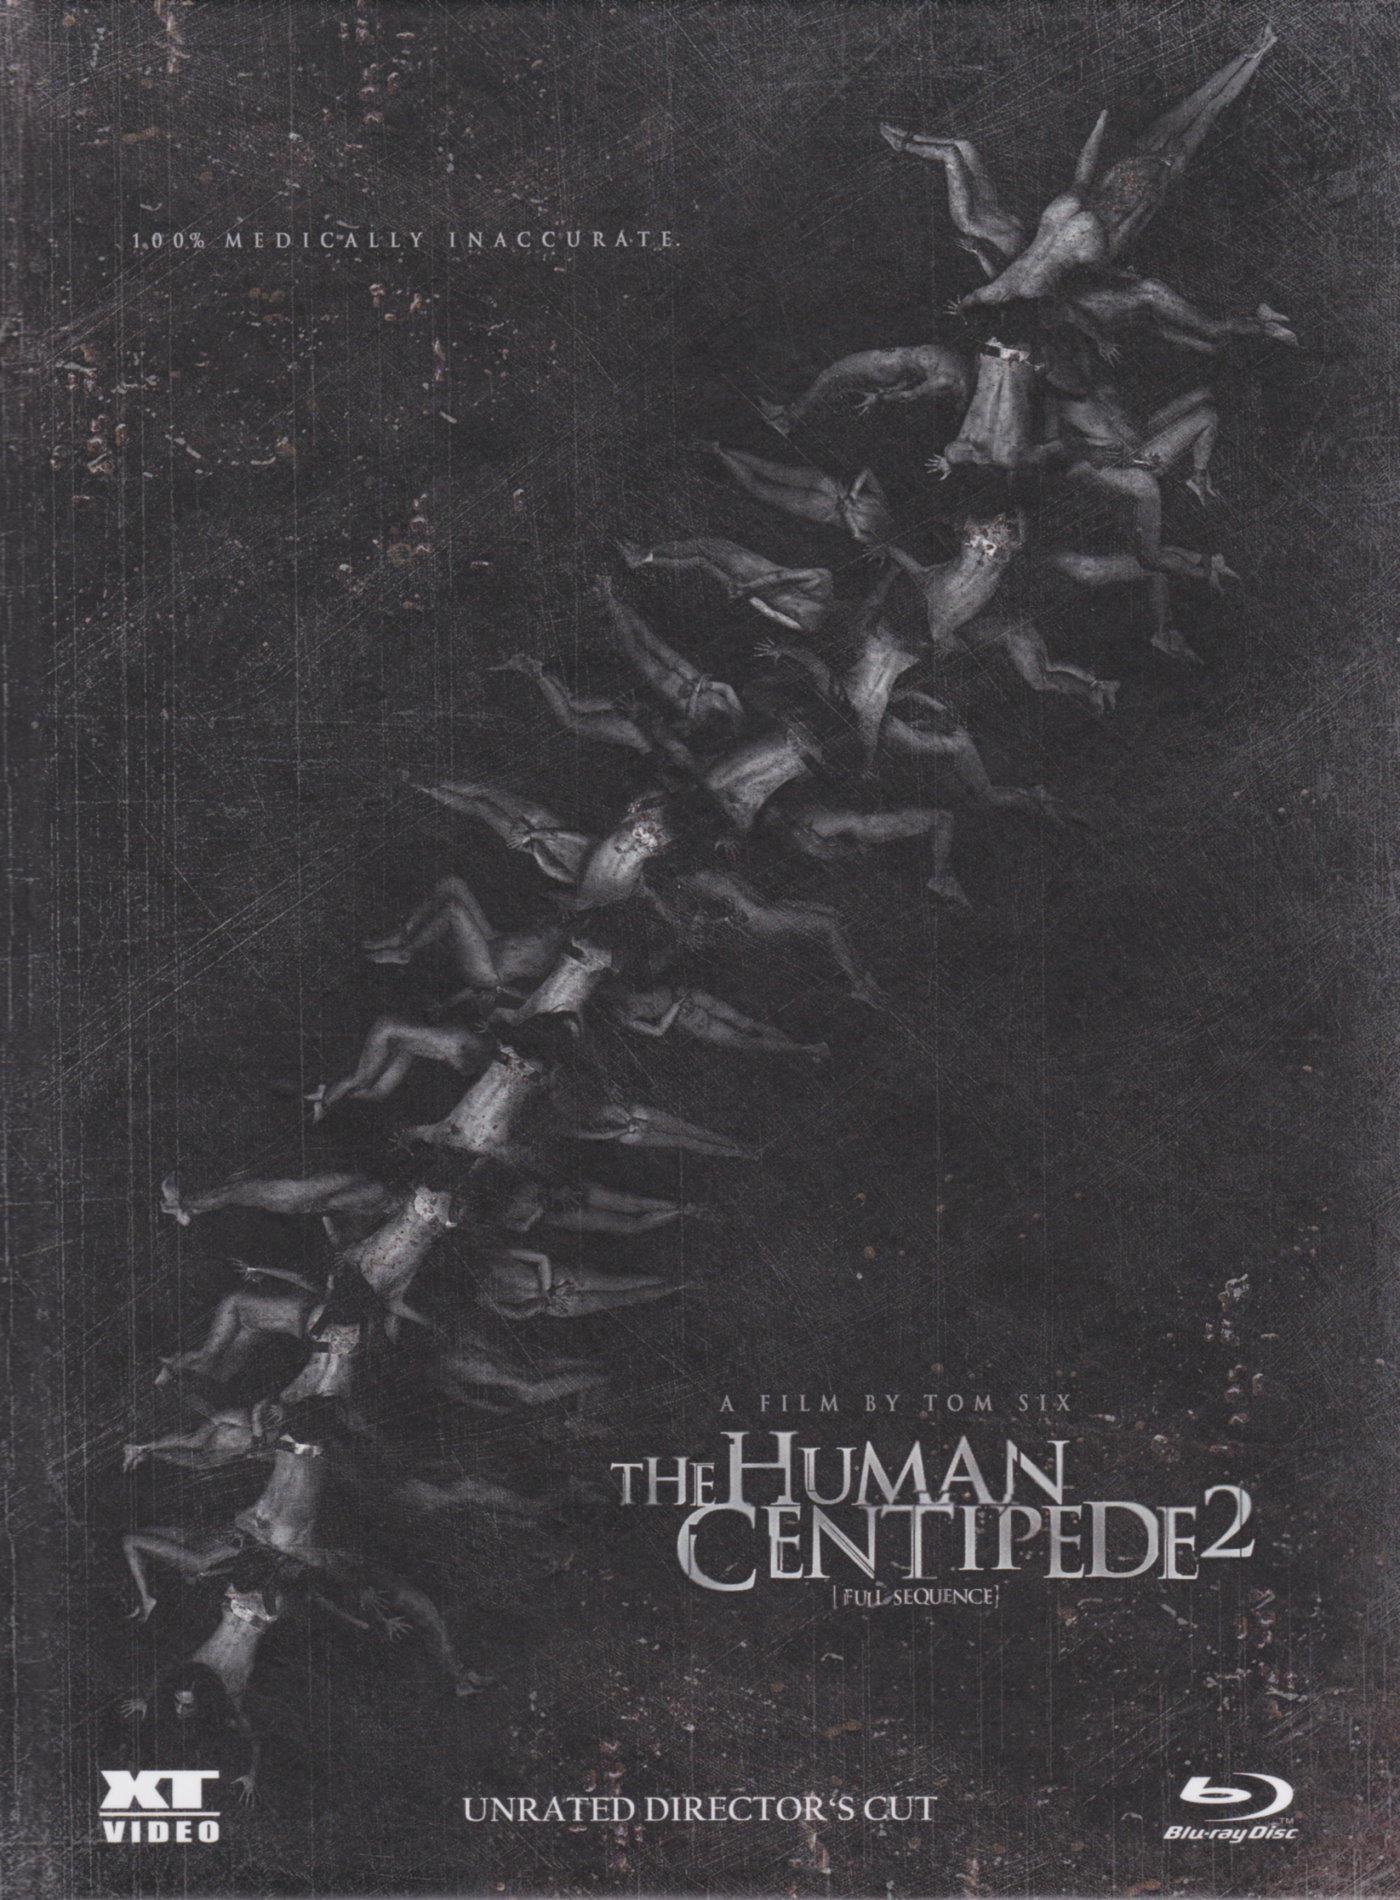 Cover - The Human Centipede 2 - [Full Sequence].jpg